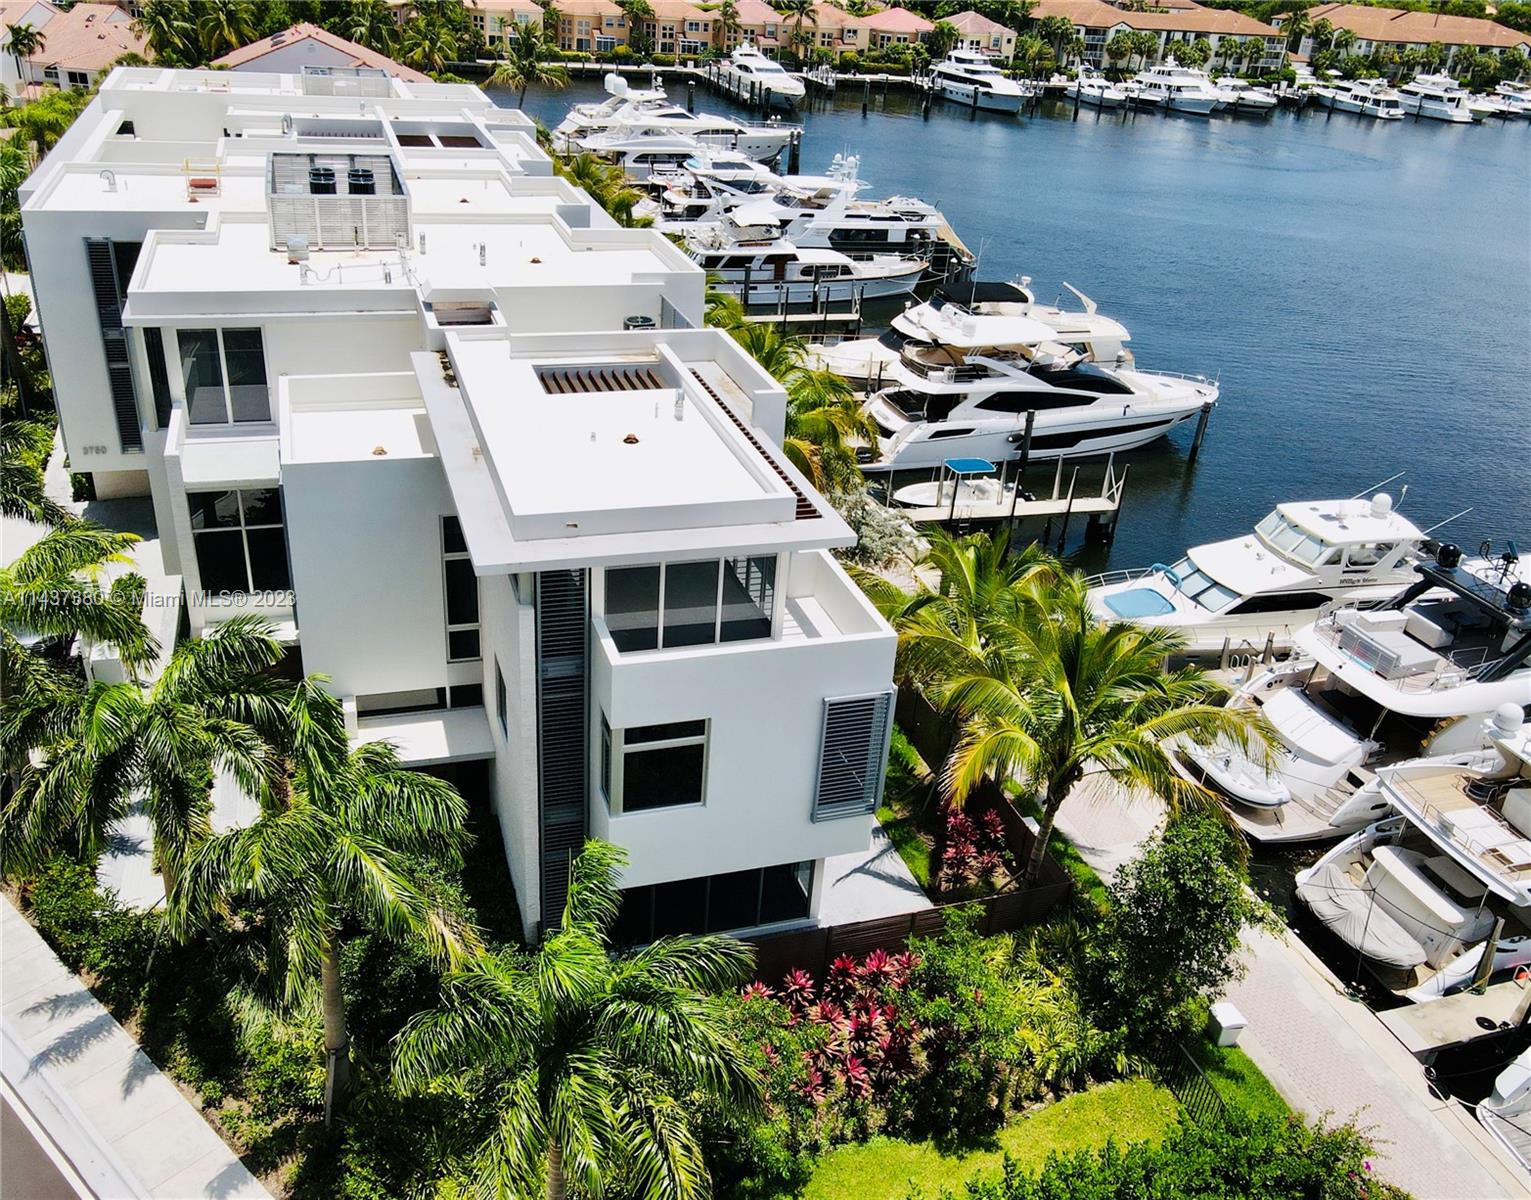 Discover the epitome of luxury living in this magnificent 3-story waterfront townhouse gem in Aventura! With 12 to 14 ft ceilings, an open floor kitchen by MiaCucina with top-of-the-line Wolf and Subzero appliances, and a large island with quartz countertops and wine cooler. Entertaining is a breeze with outdoor and rooftop terraces. With 4Bd + staff quarter and 5.5 baths, a private elevator, and access to The Point's 25,000 Sf state of the art club and spa, fitness center, jacuzzi, steam room, 4 tennis courts, 3 pools, children's playground, cafe, valet parking and more, this is the best deal in the area. Don't miss out on this dream home – call now! #LuxuryLiving #WaterfrontLiving"